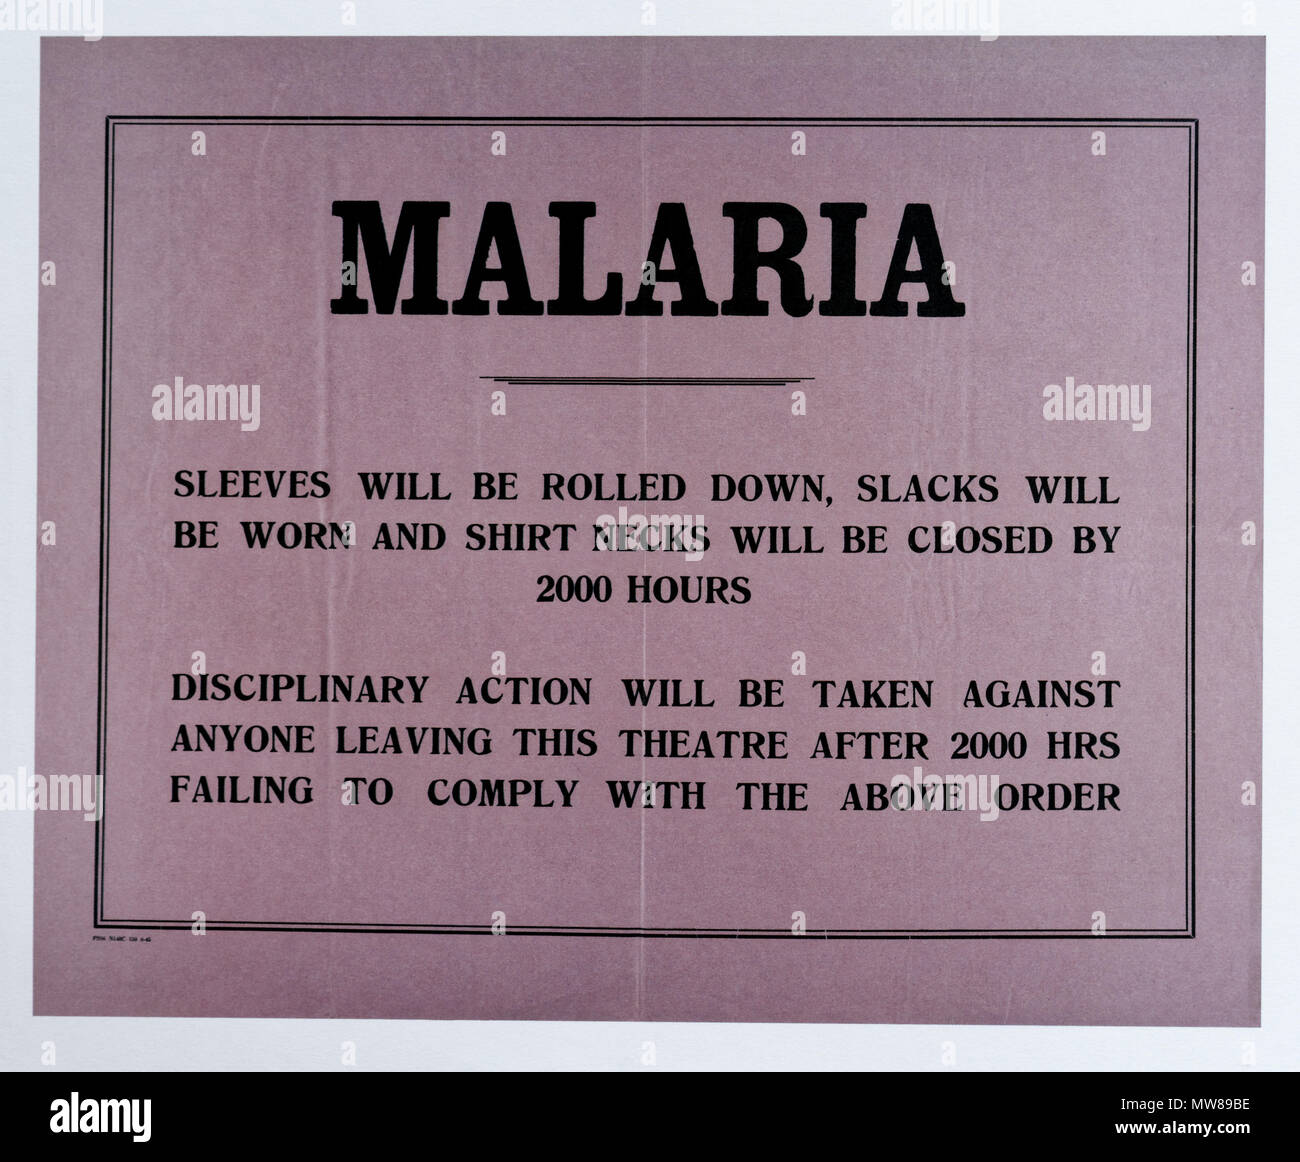 A Second World War poster containing advice on how to reduce the risk of malaria, and threatening discipline on those who don't follow the advice Stock Photo